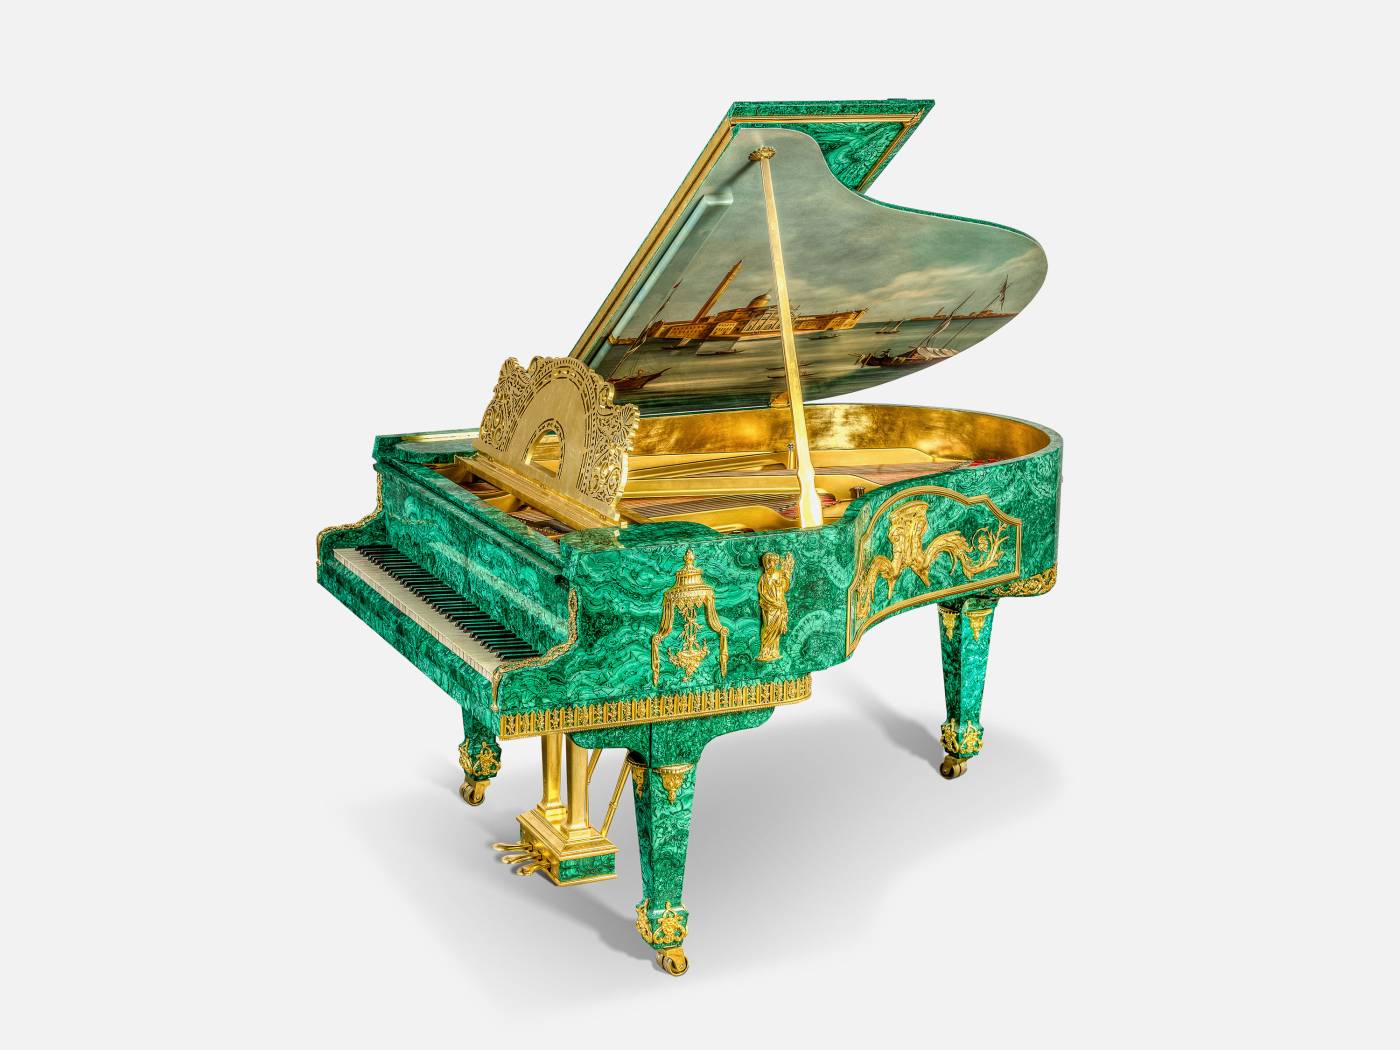 ART. 1096 – The elegance of luxury classic Pianos made in Italy by C.G. Capelletti.